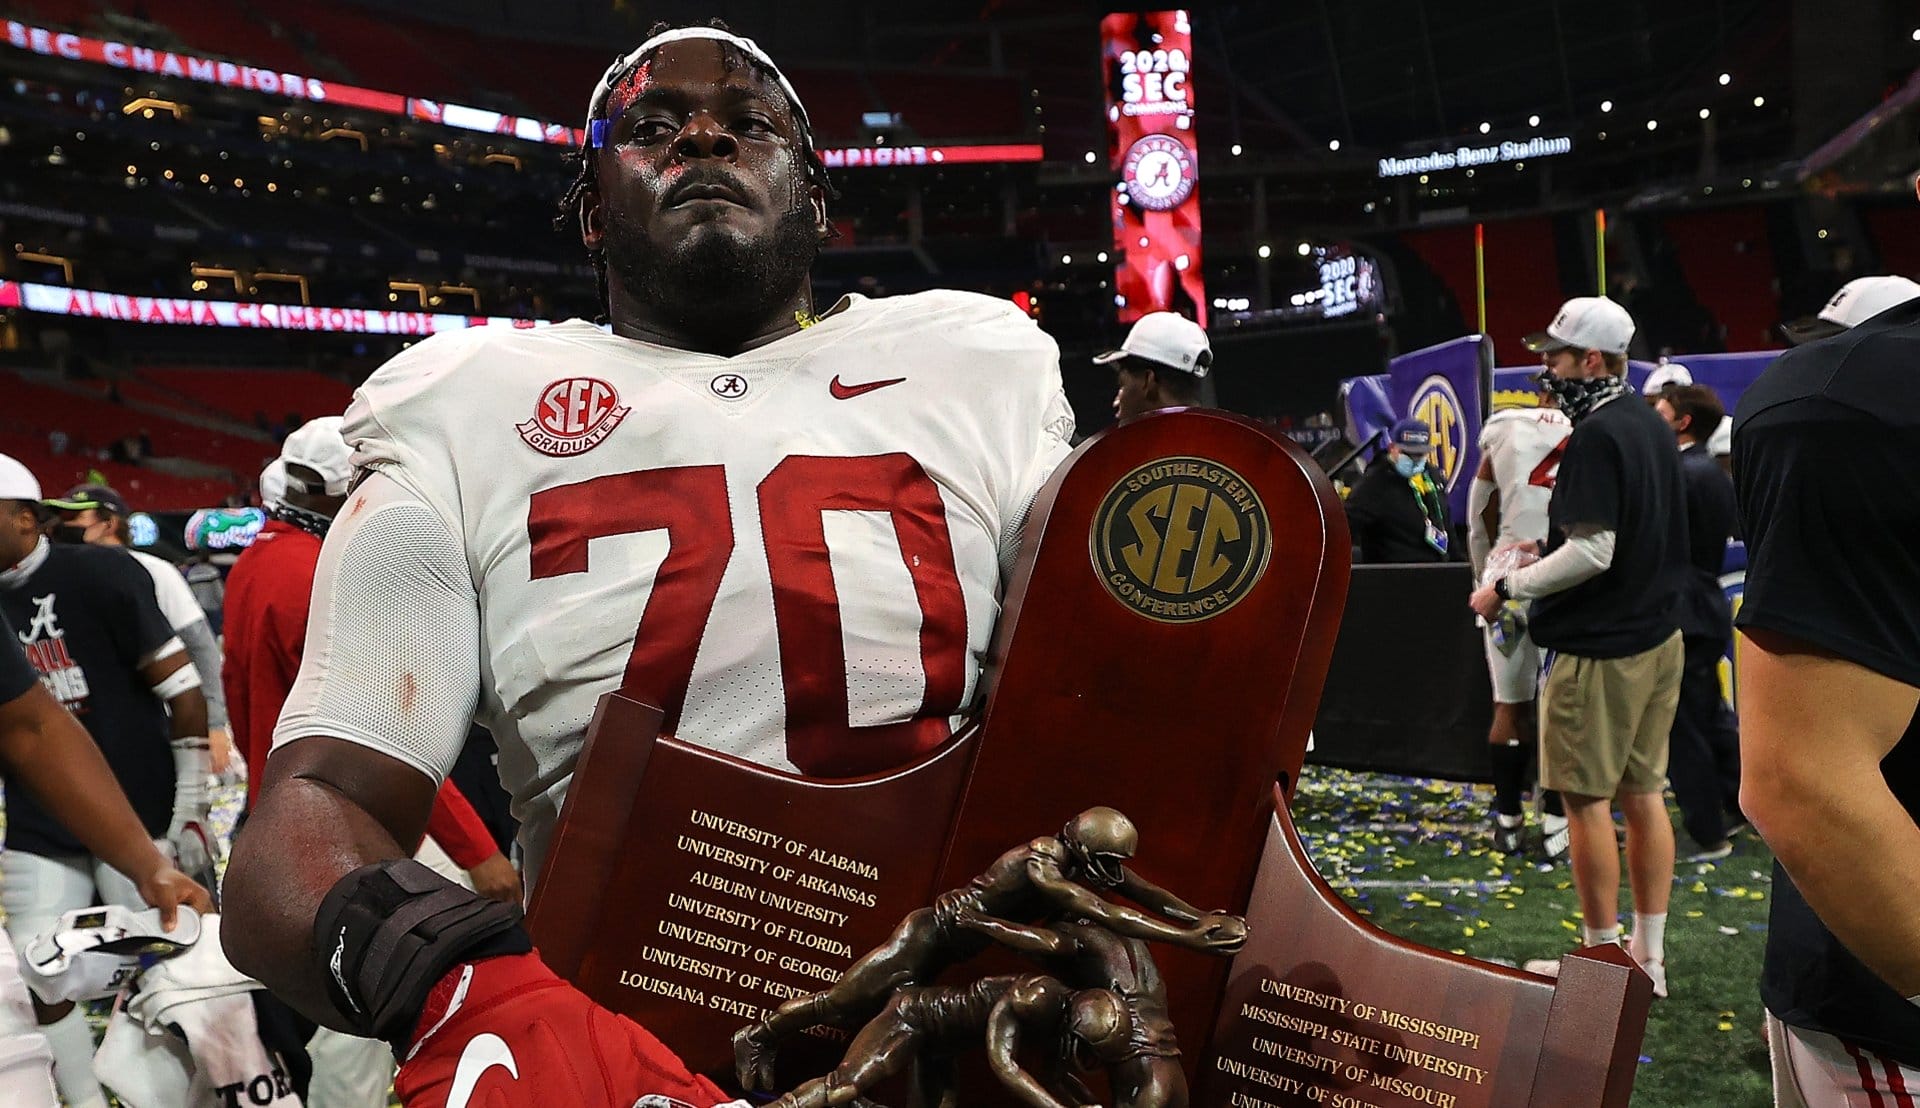 Alex Leatherwood #70 of the Alabama Crimson Tide carries the trophy after their 52-46 win over the Florida Gators in the SEC Championship at Mercedes-Benz Stadium on December 19, 2020 in Atlanta, Georgia. (Photo by Kevin C. Cox/Getty Images)